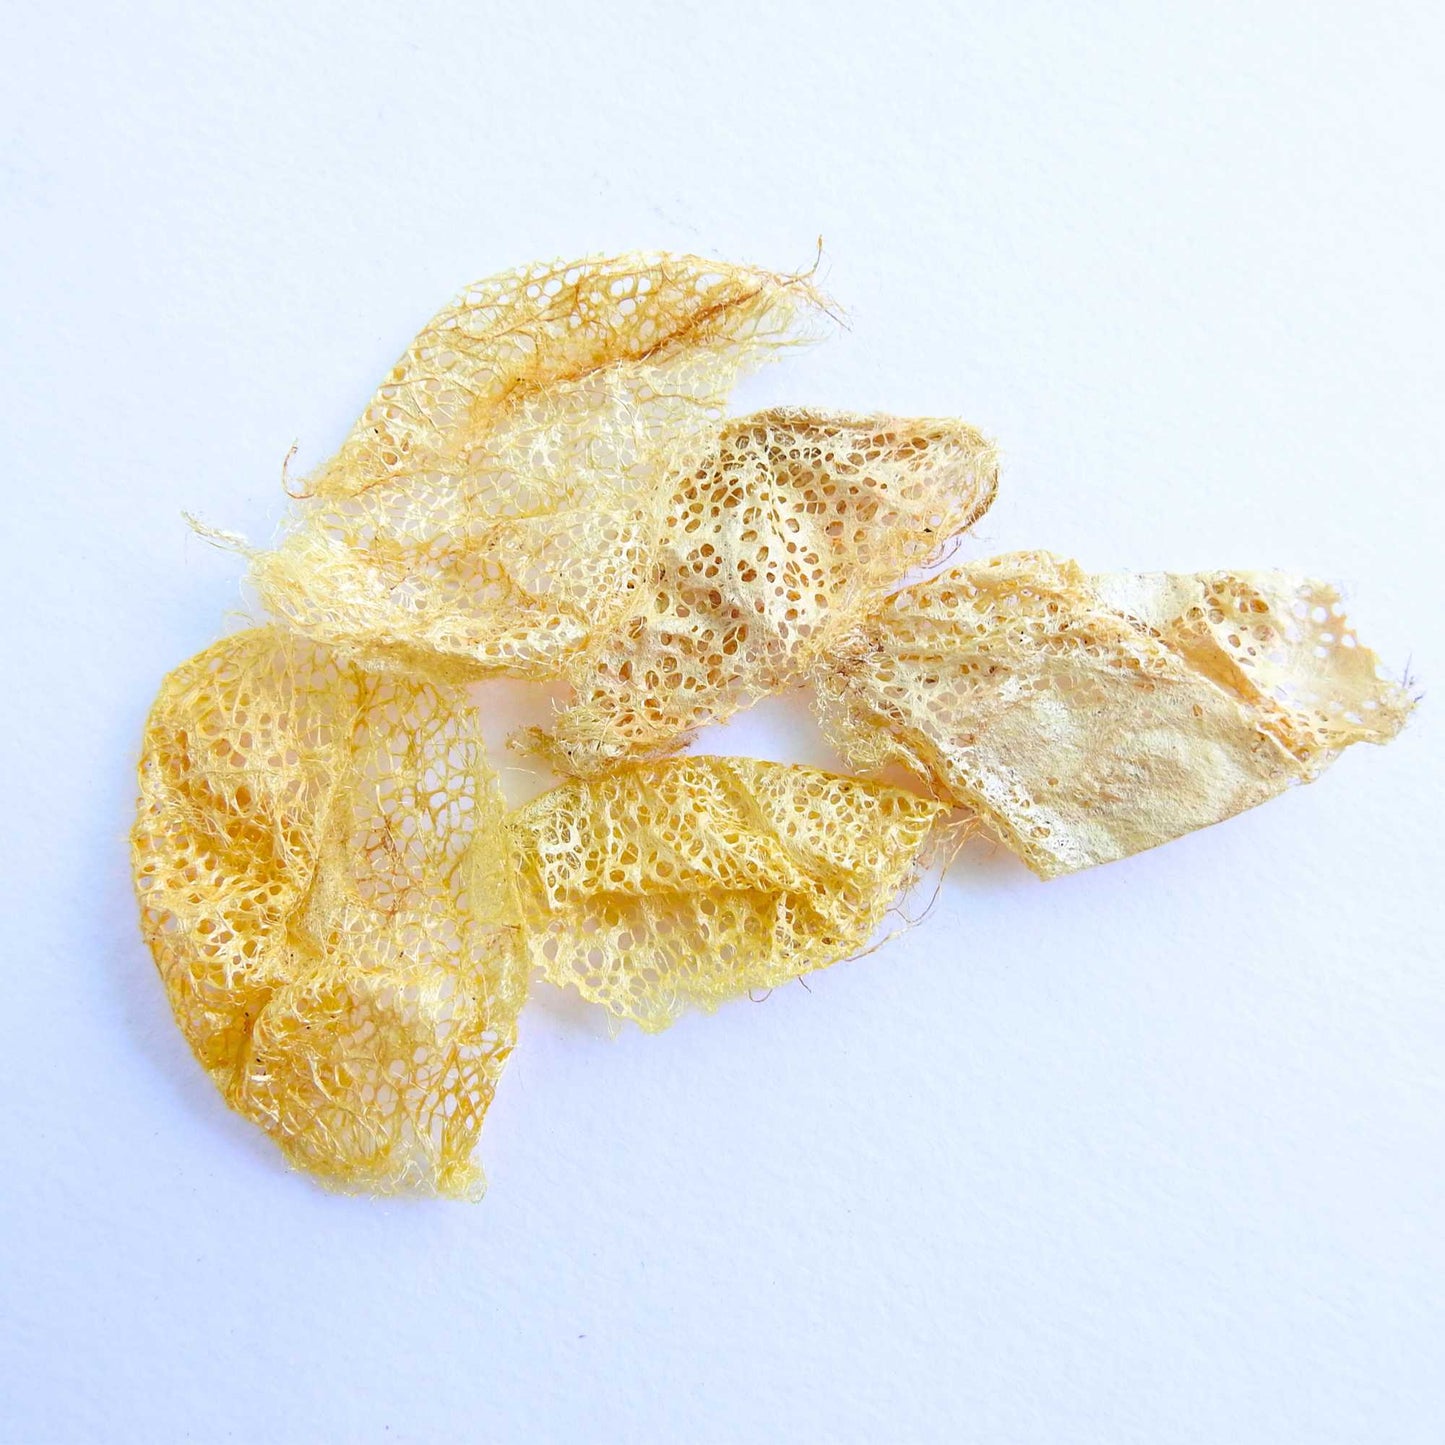 Wild silkworm cocoons for embellishments jewellery craft felting spinning. Golden cocoons. habu textiles cricula cocoons